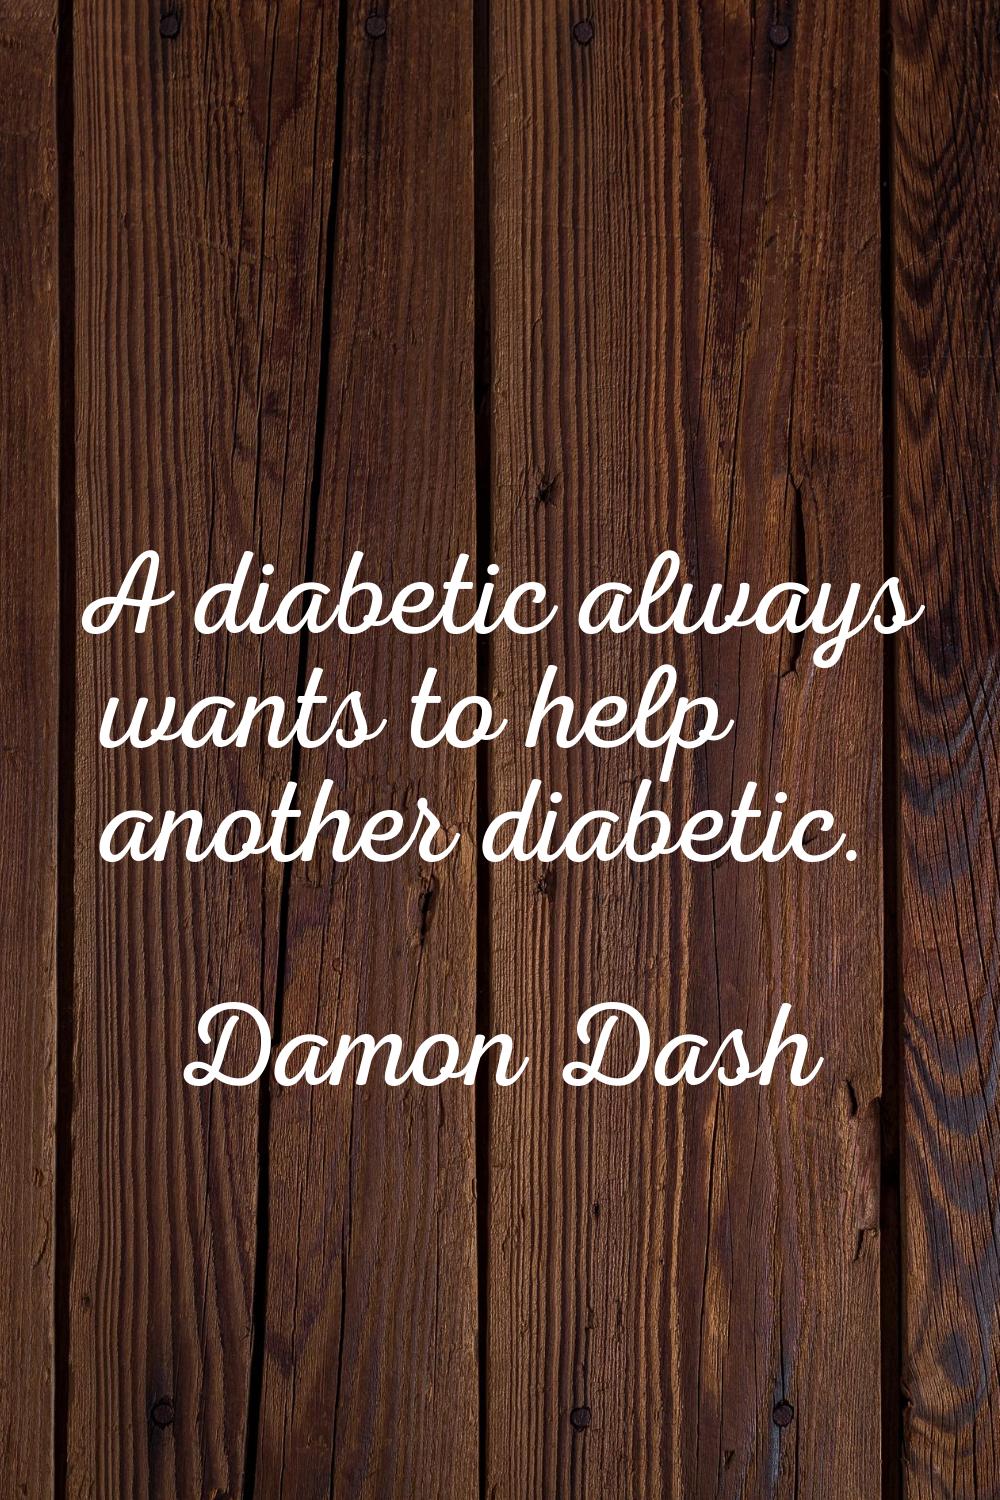 A diabetic always wants to help another diabetic.